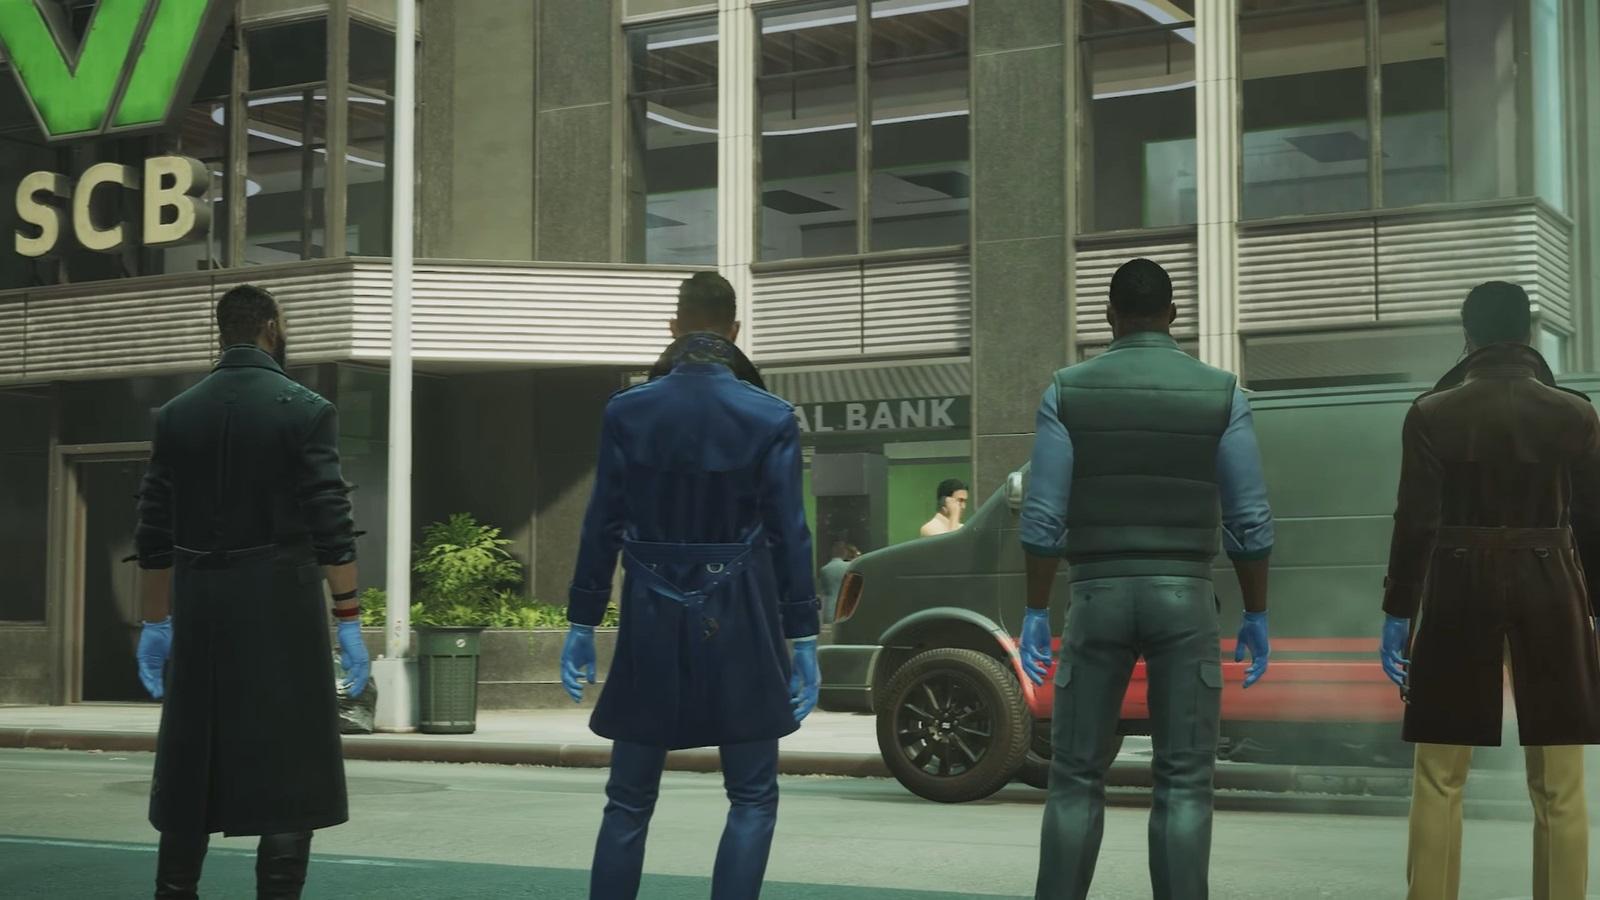 PAYDAY 3 Gameplay - No Rest For The Wicked Bank Heist 